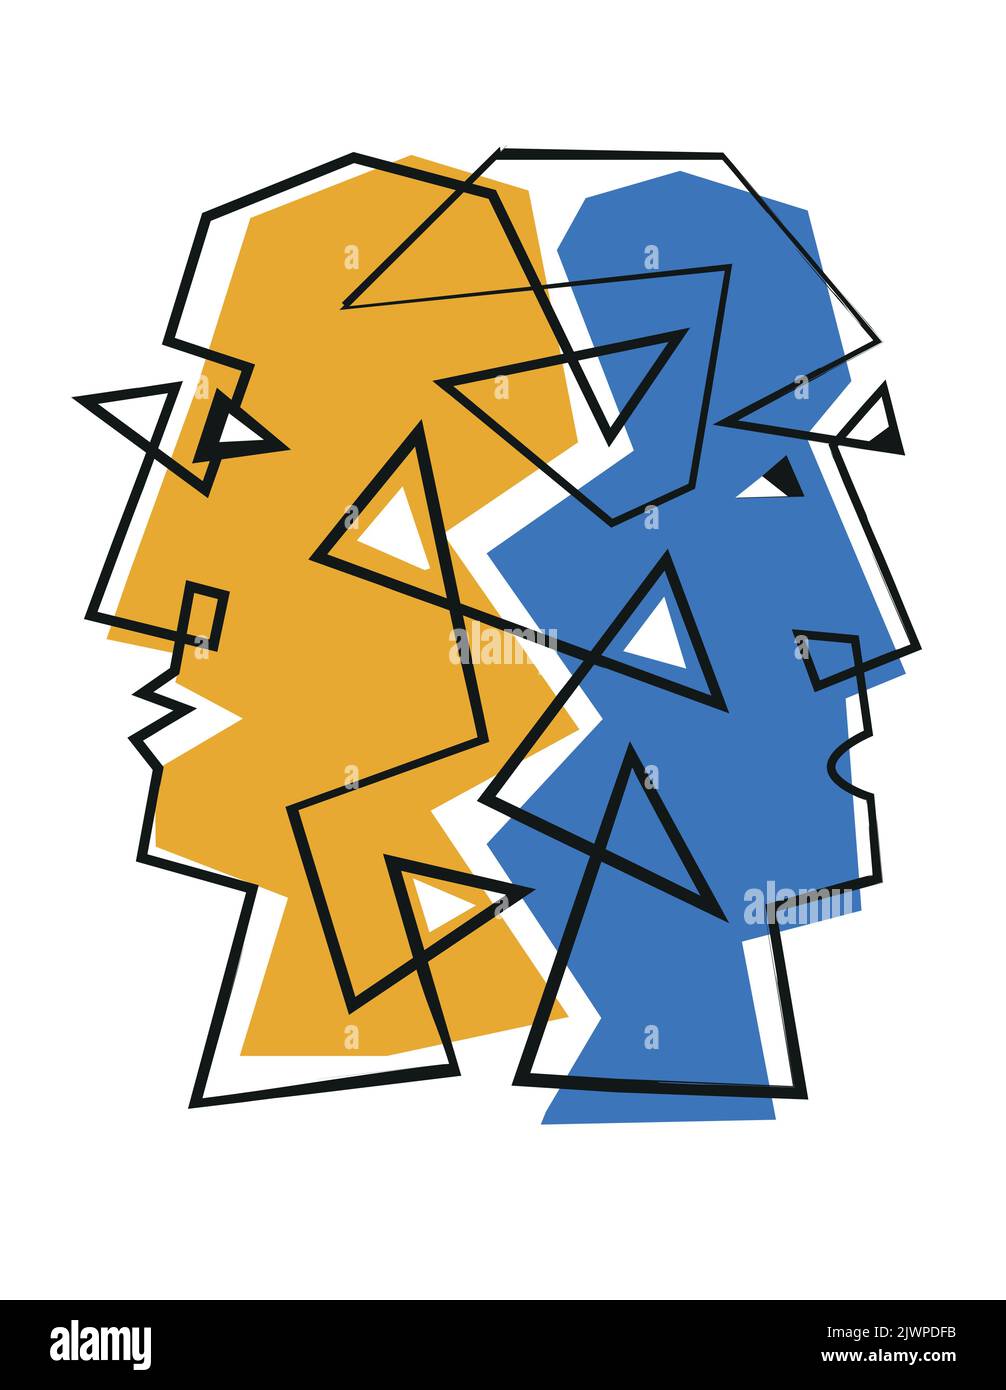 Schizophrenia depression, bipolar disorder, male heads, lineart. Expressive illustration of connected Male heads. Vector available. Stock Vector